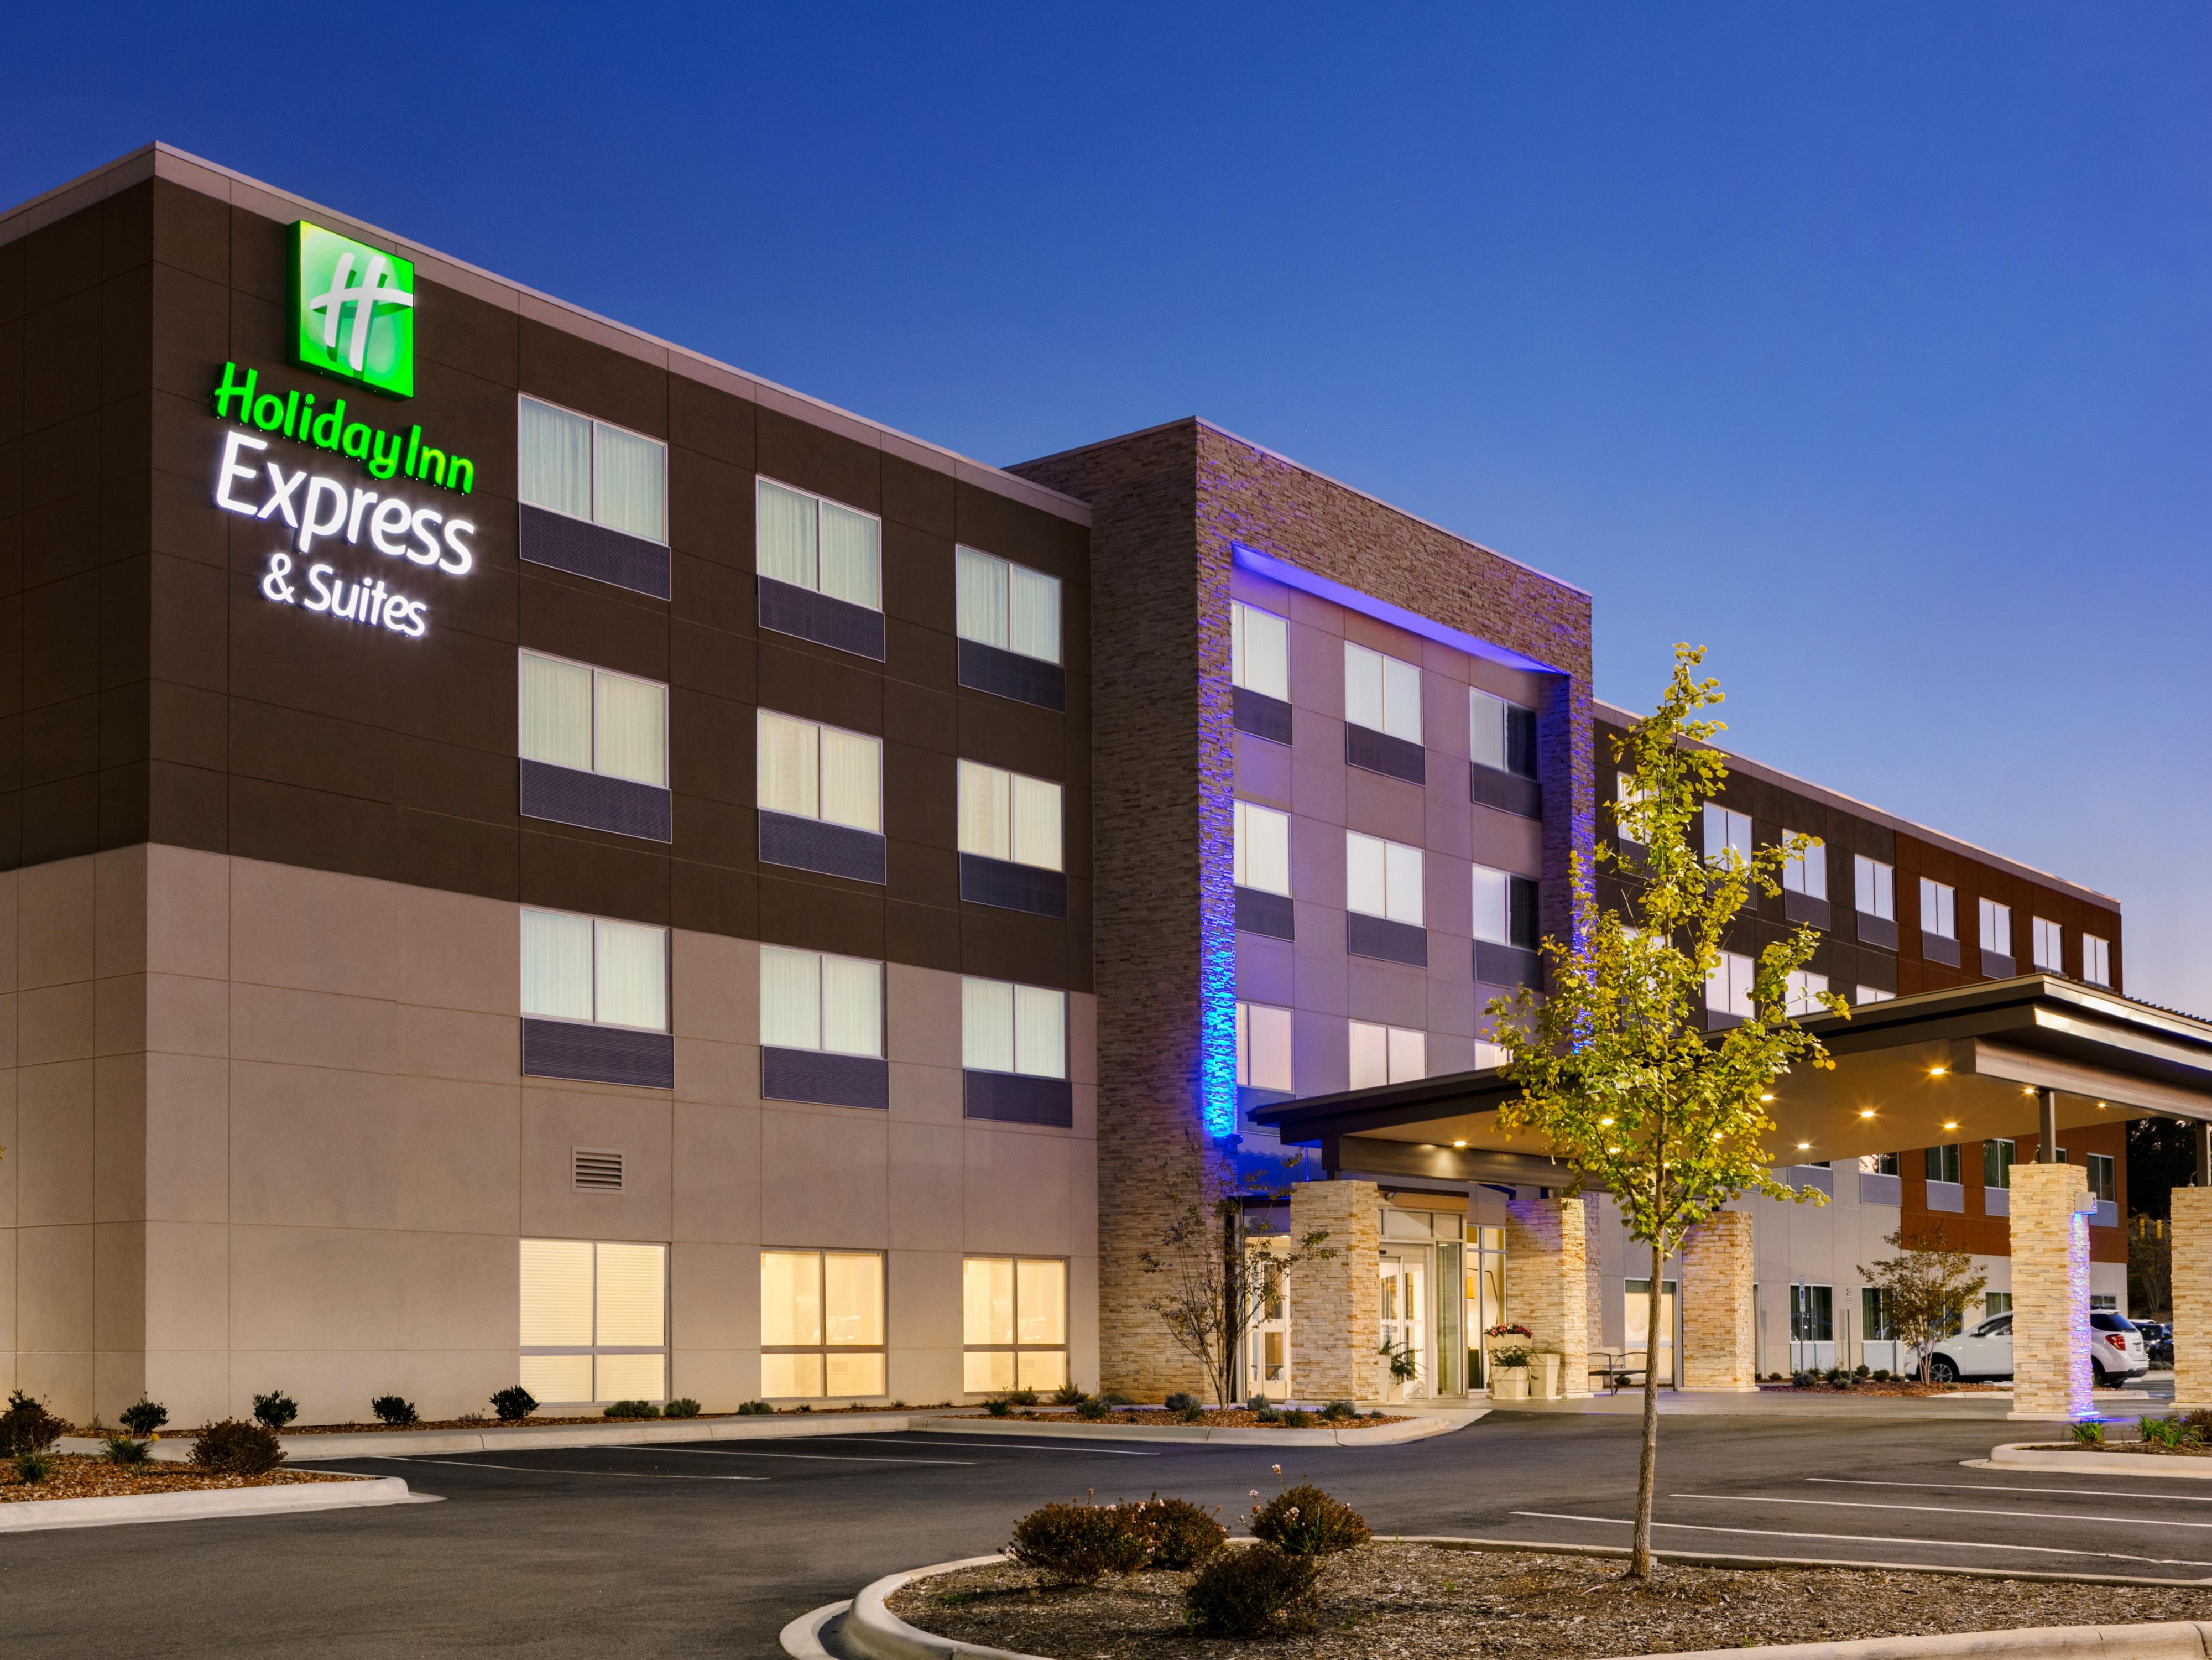 Holiday Inn Express And Suites Salisbury 5380570313 4x3